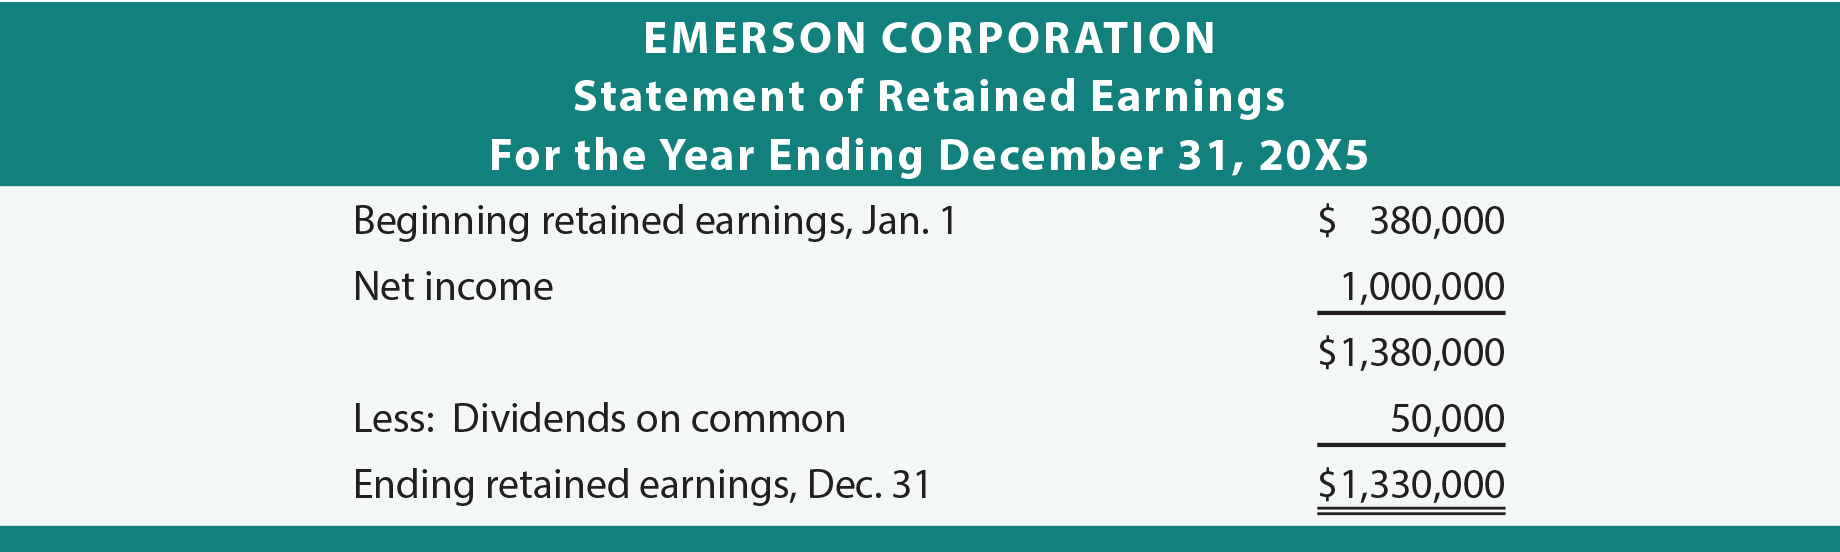 Emerson Corporation Statement of Retained Earnings